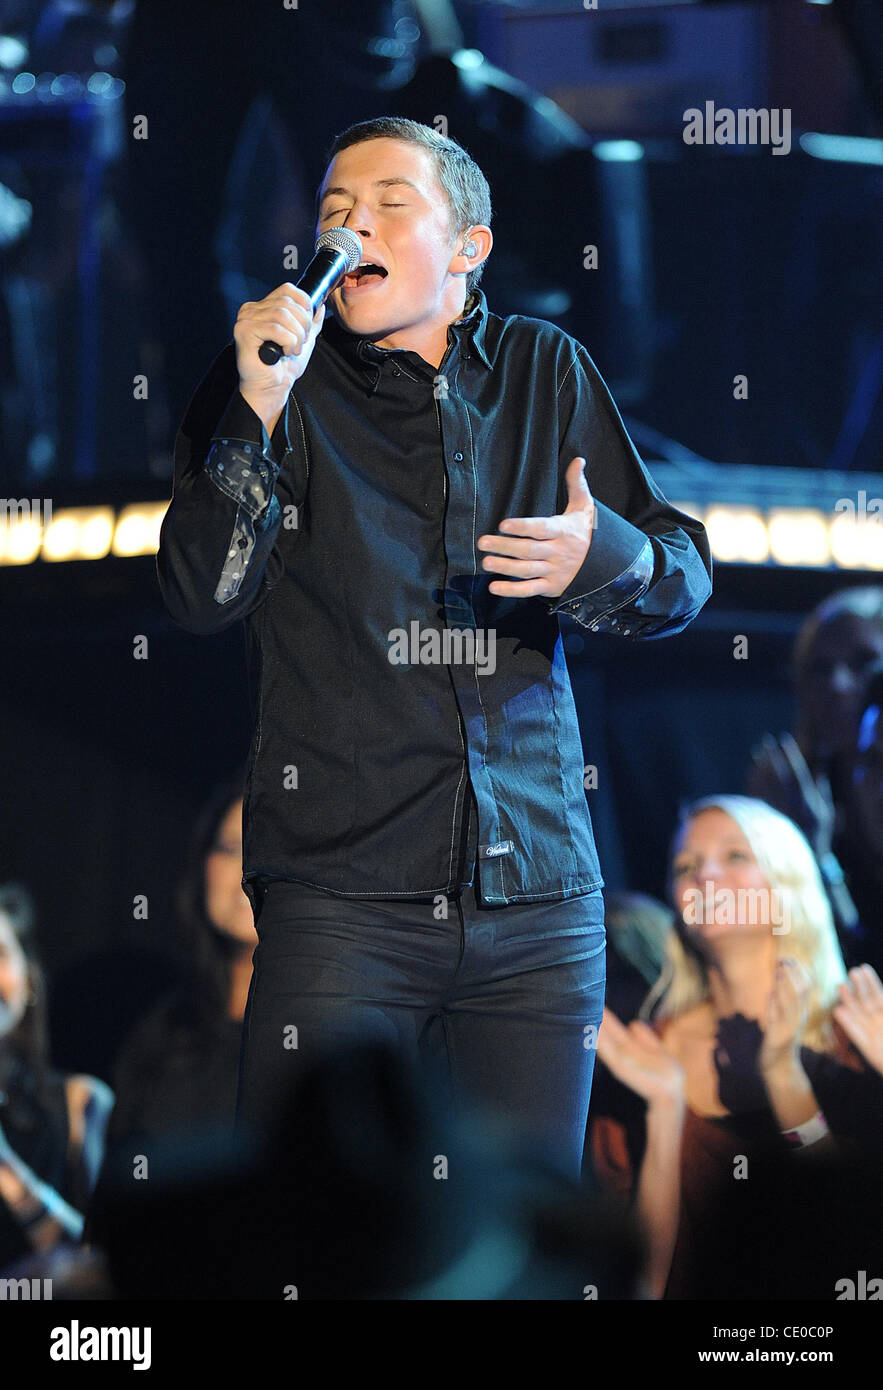 Nov 9, 2011 - Nashville, Tennessee; USA - Singer SCOTTY MCCREERY  performs at the 45th Annual CMA Music Awards that took place at the Bridgestone Arena located in downtown Nashville.  Copyright 2011 Jason Moore. (Credit Image: © Jason Moore/ZUMAPRESS.com) Stock Photo